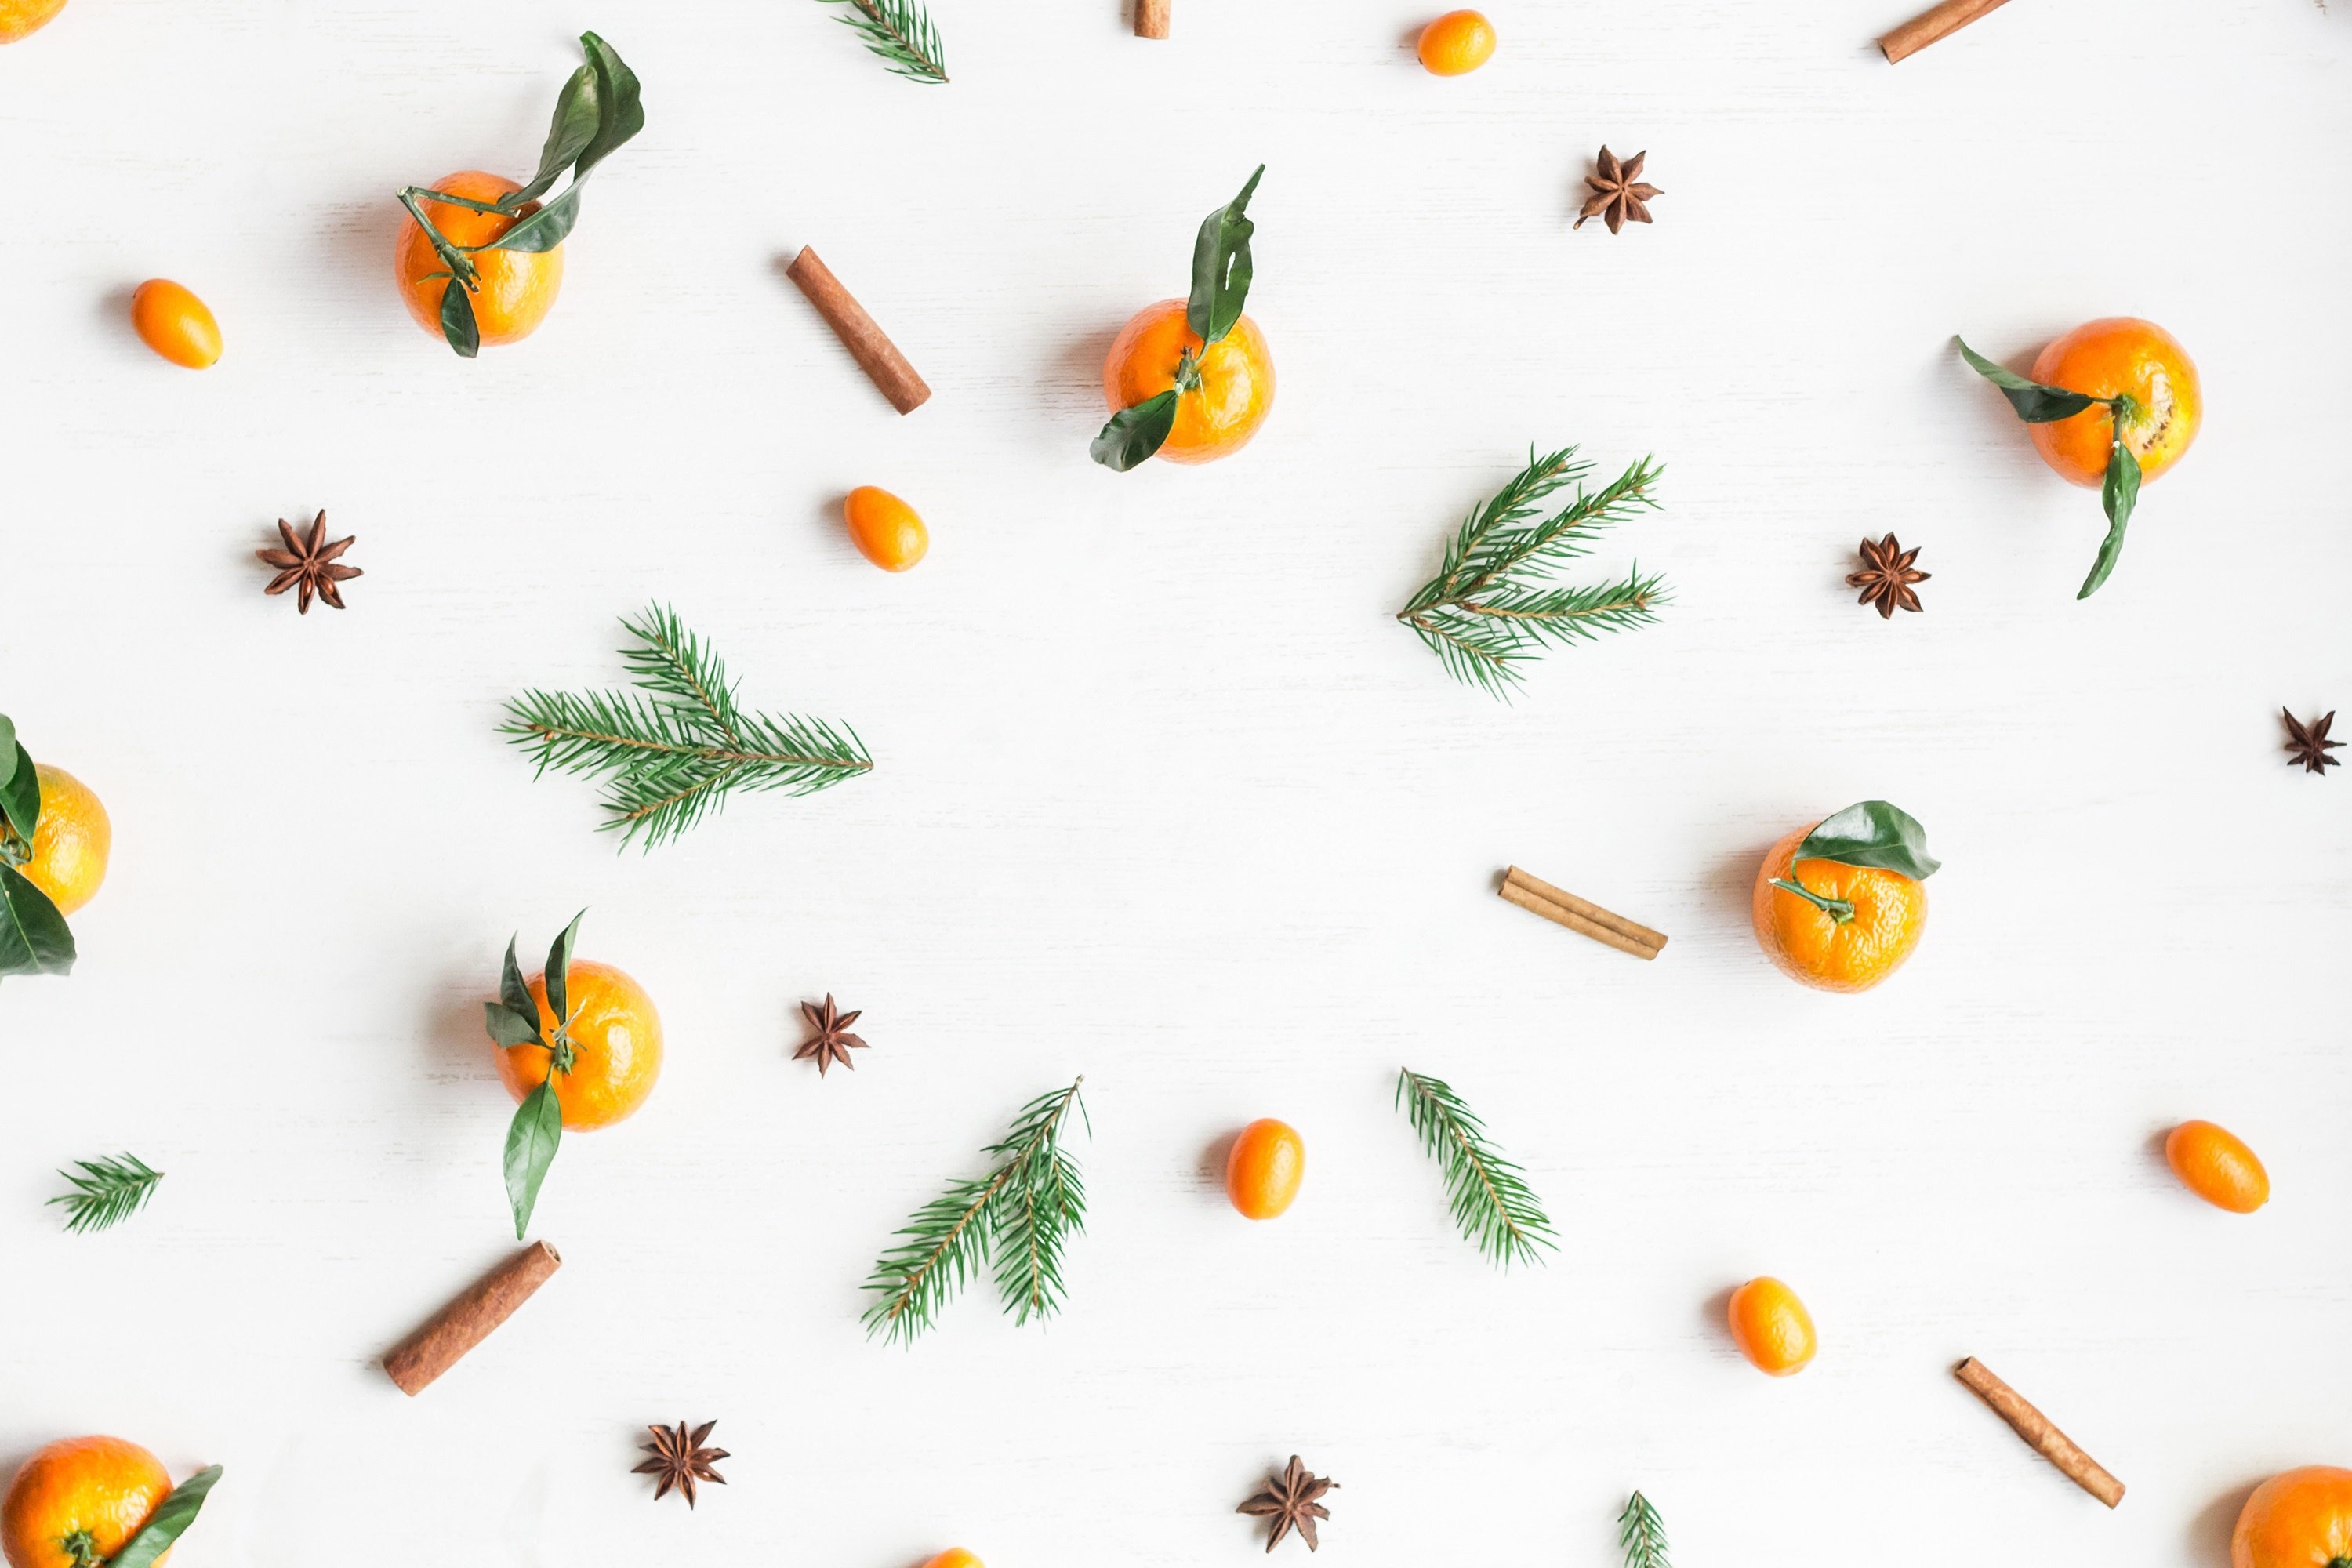 11 Ways to Stay Healthy During the Holidays